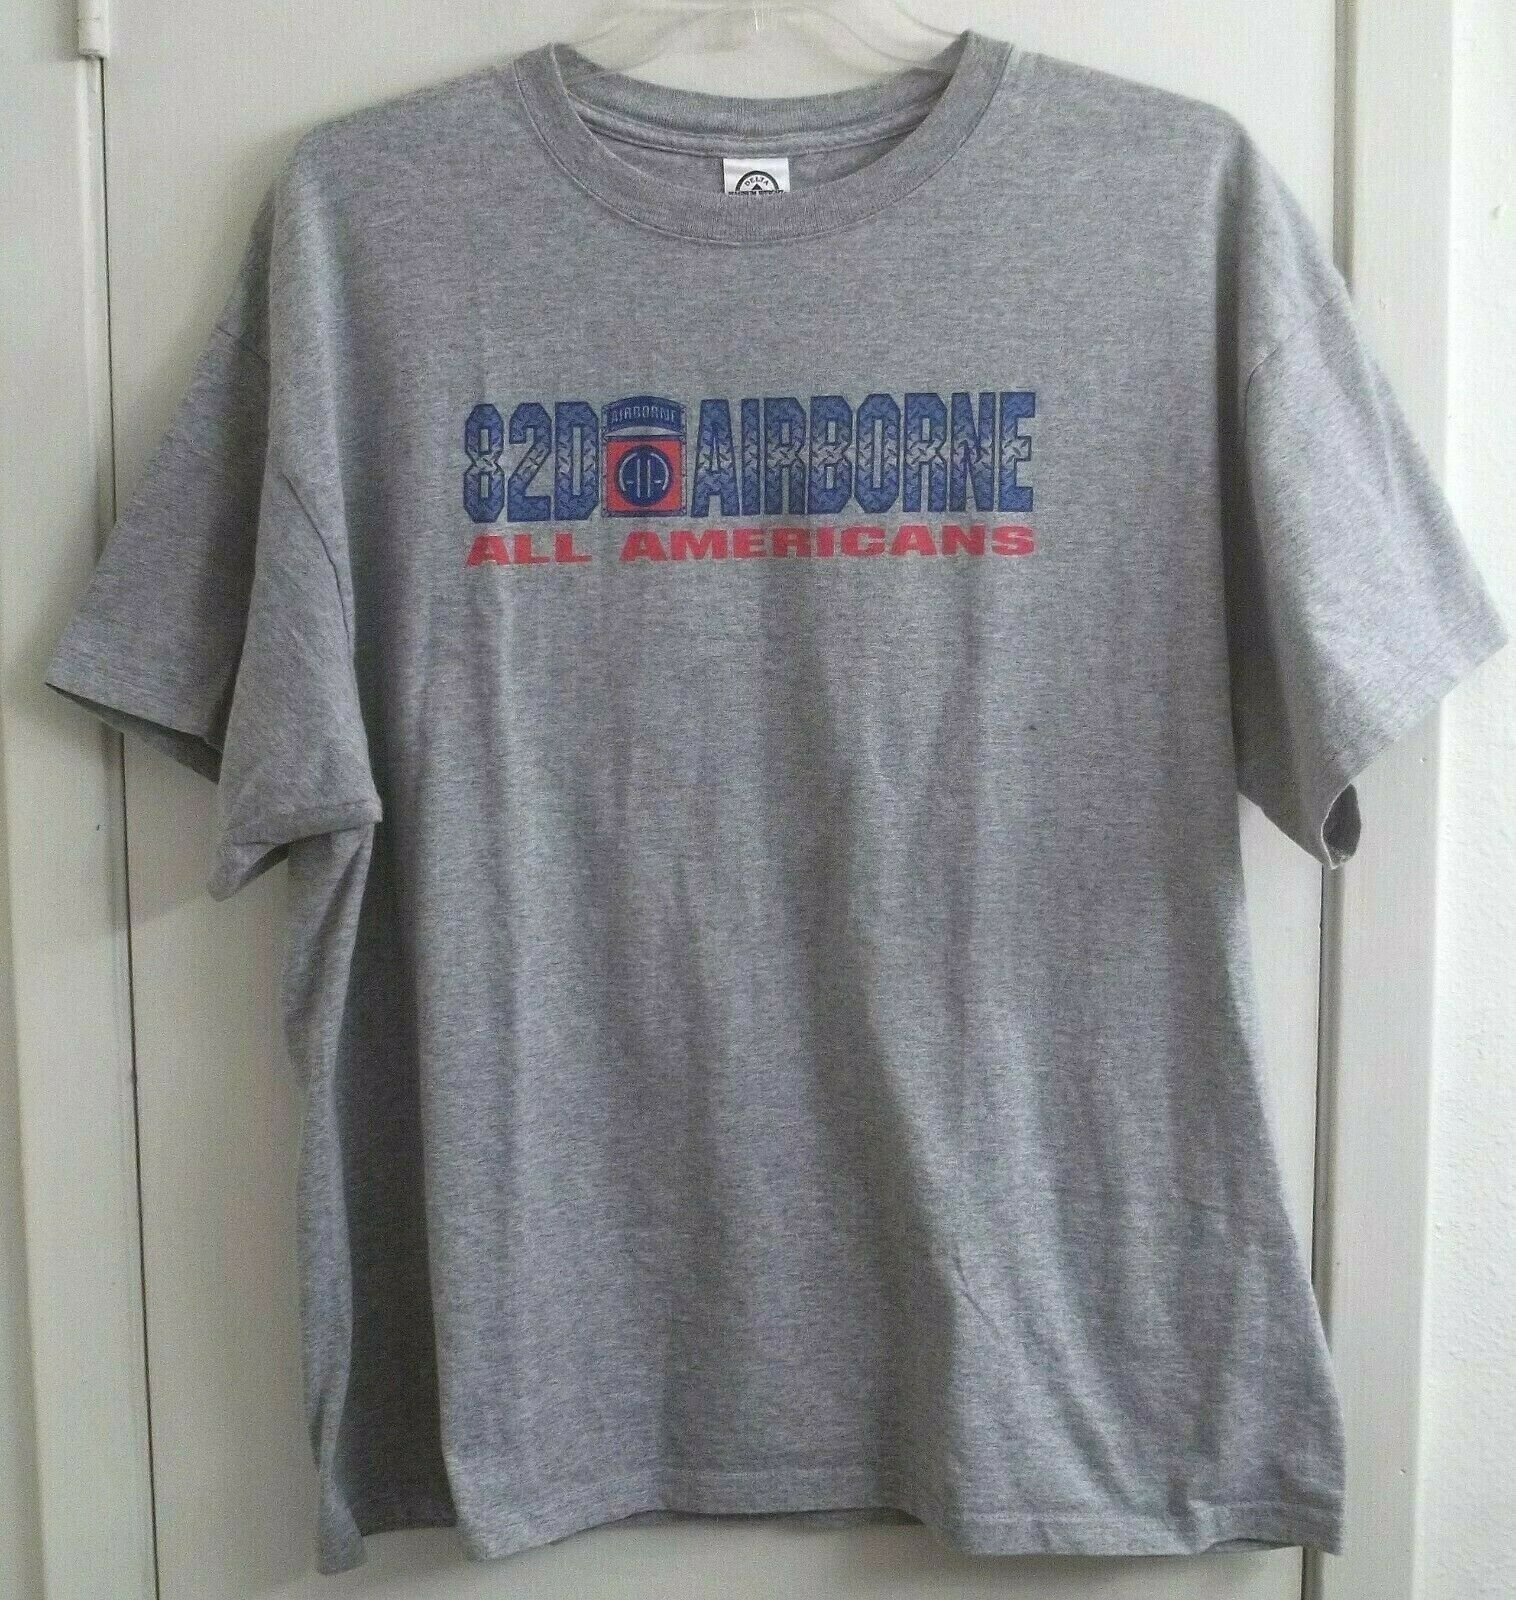 Airborne 82d Division All Americans T-shirt Adult 2xl Xx-large U. S. Army